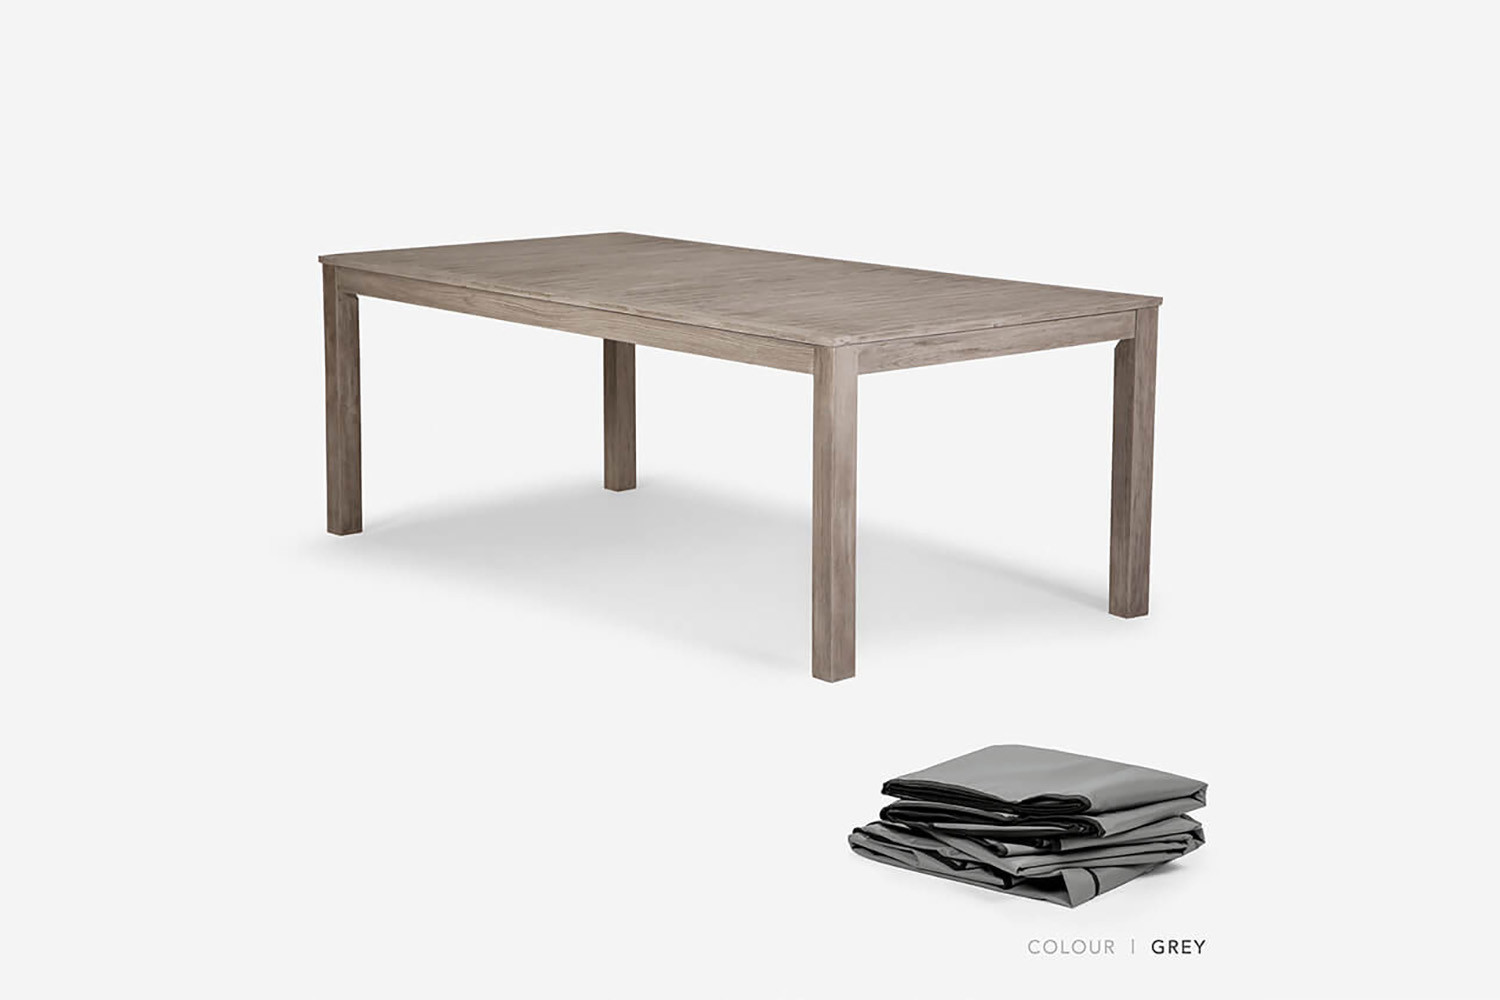 Capri Dining Table - Protective Cover - Grey | Protective Cover | Patio | Waterproof Cover  -